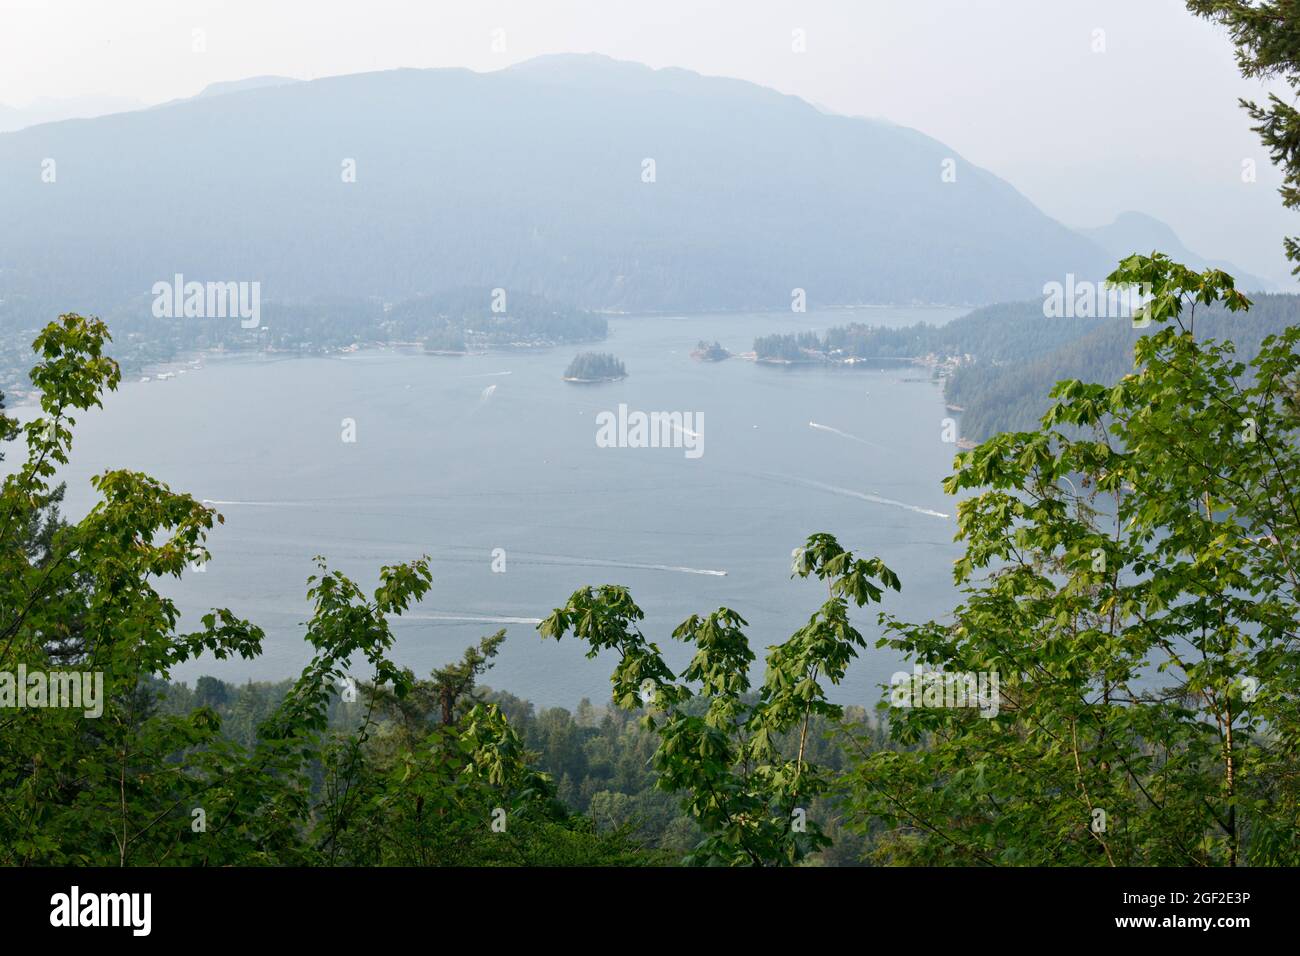 Smoke from wildfires obscures the view of the Burrard Inlet from Burnaby Mountain Park.  August 14, 2021 Stock Photo